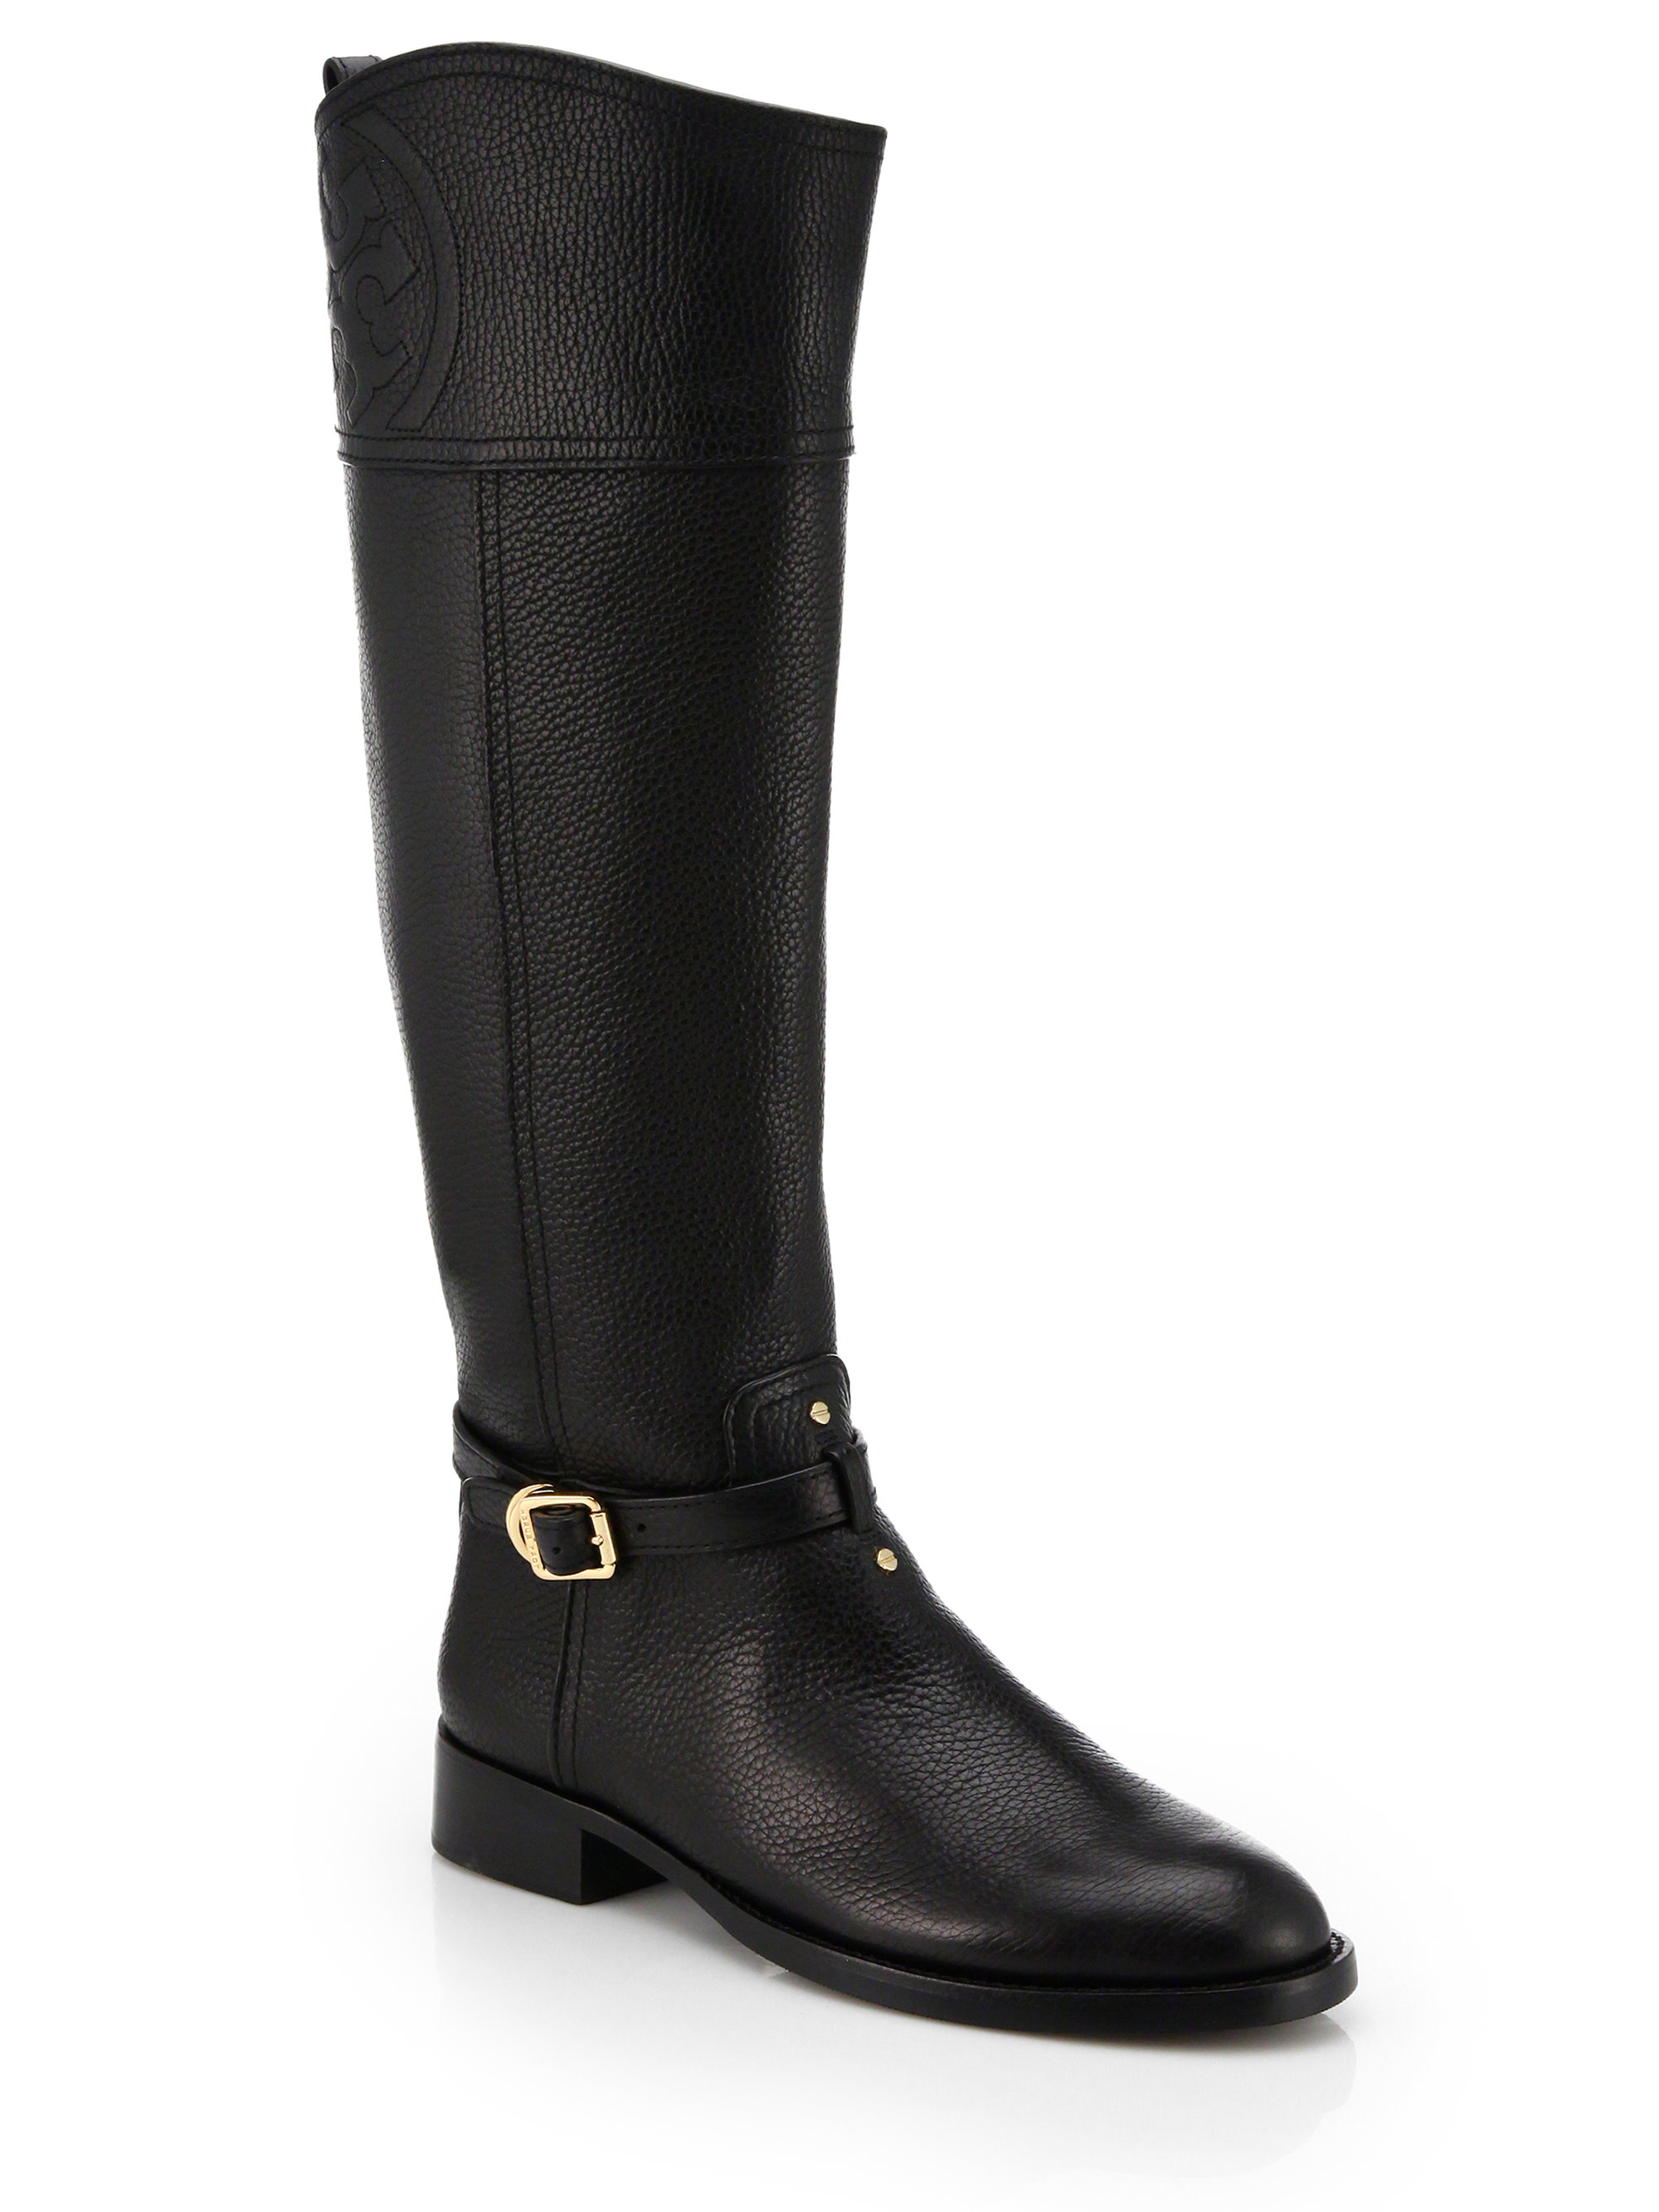 Tory Burch Marlene Leather Riding Boots in Black | Lyst